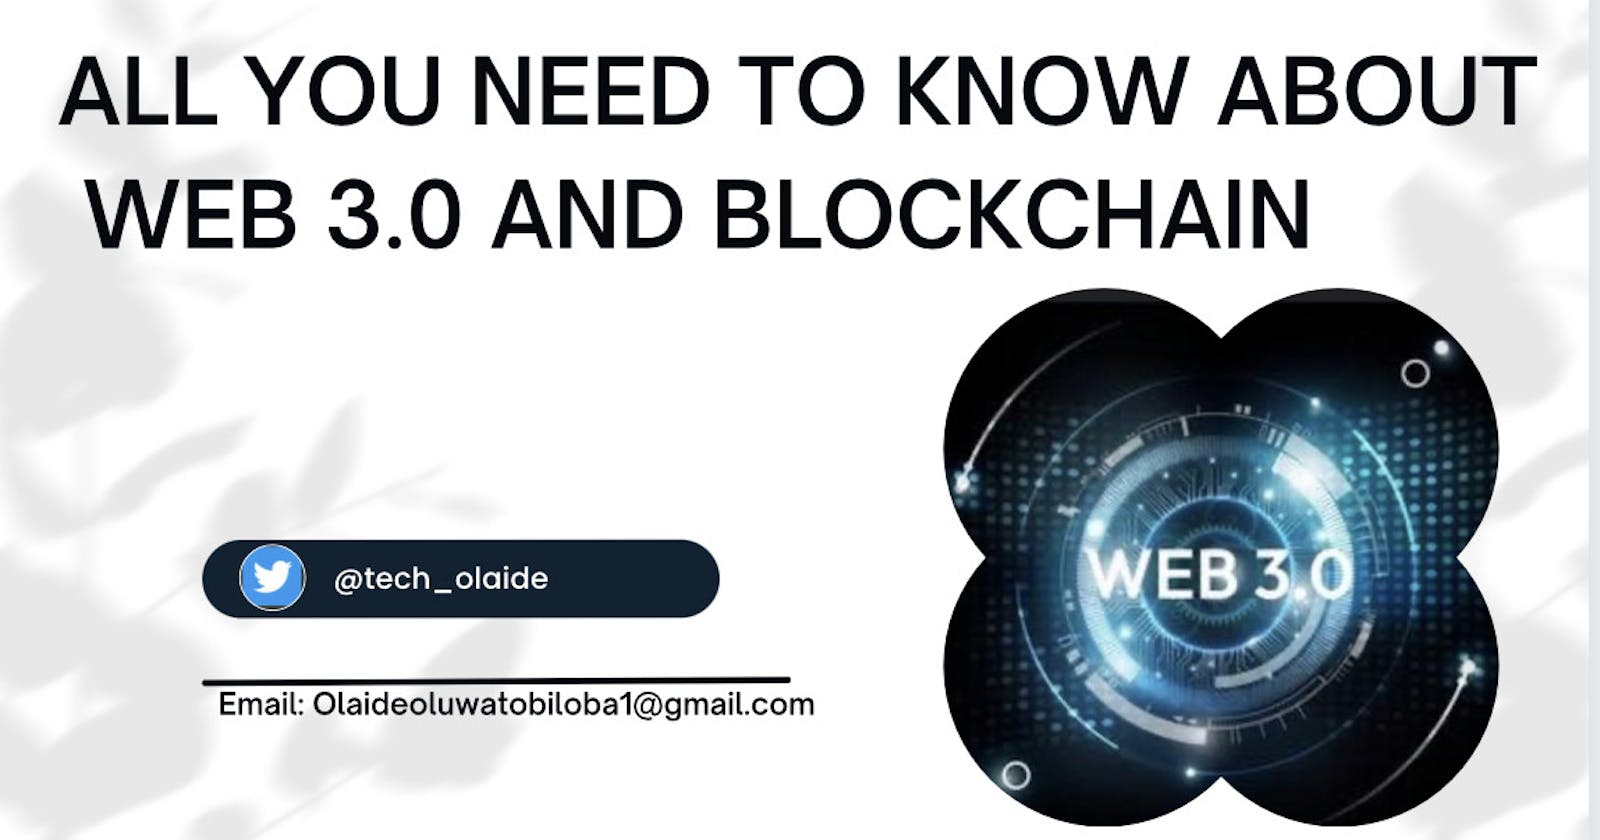 All You Need To Know About Web 3.0  And Blockchain